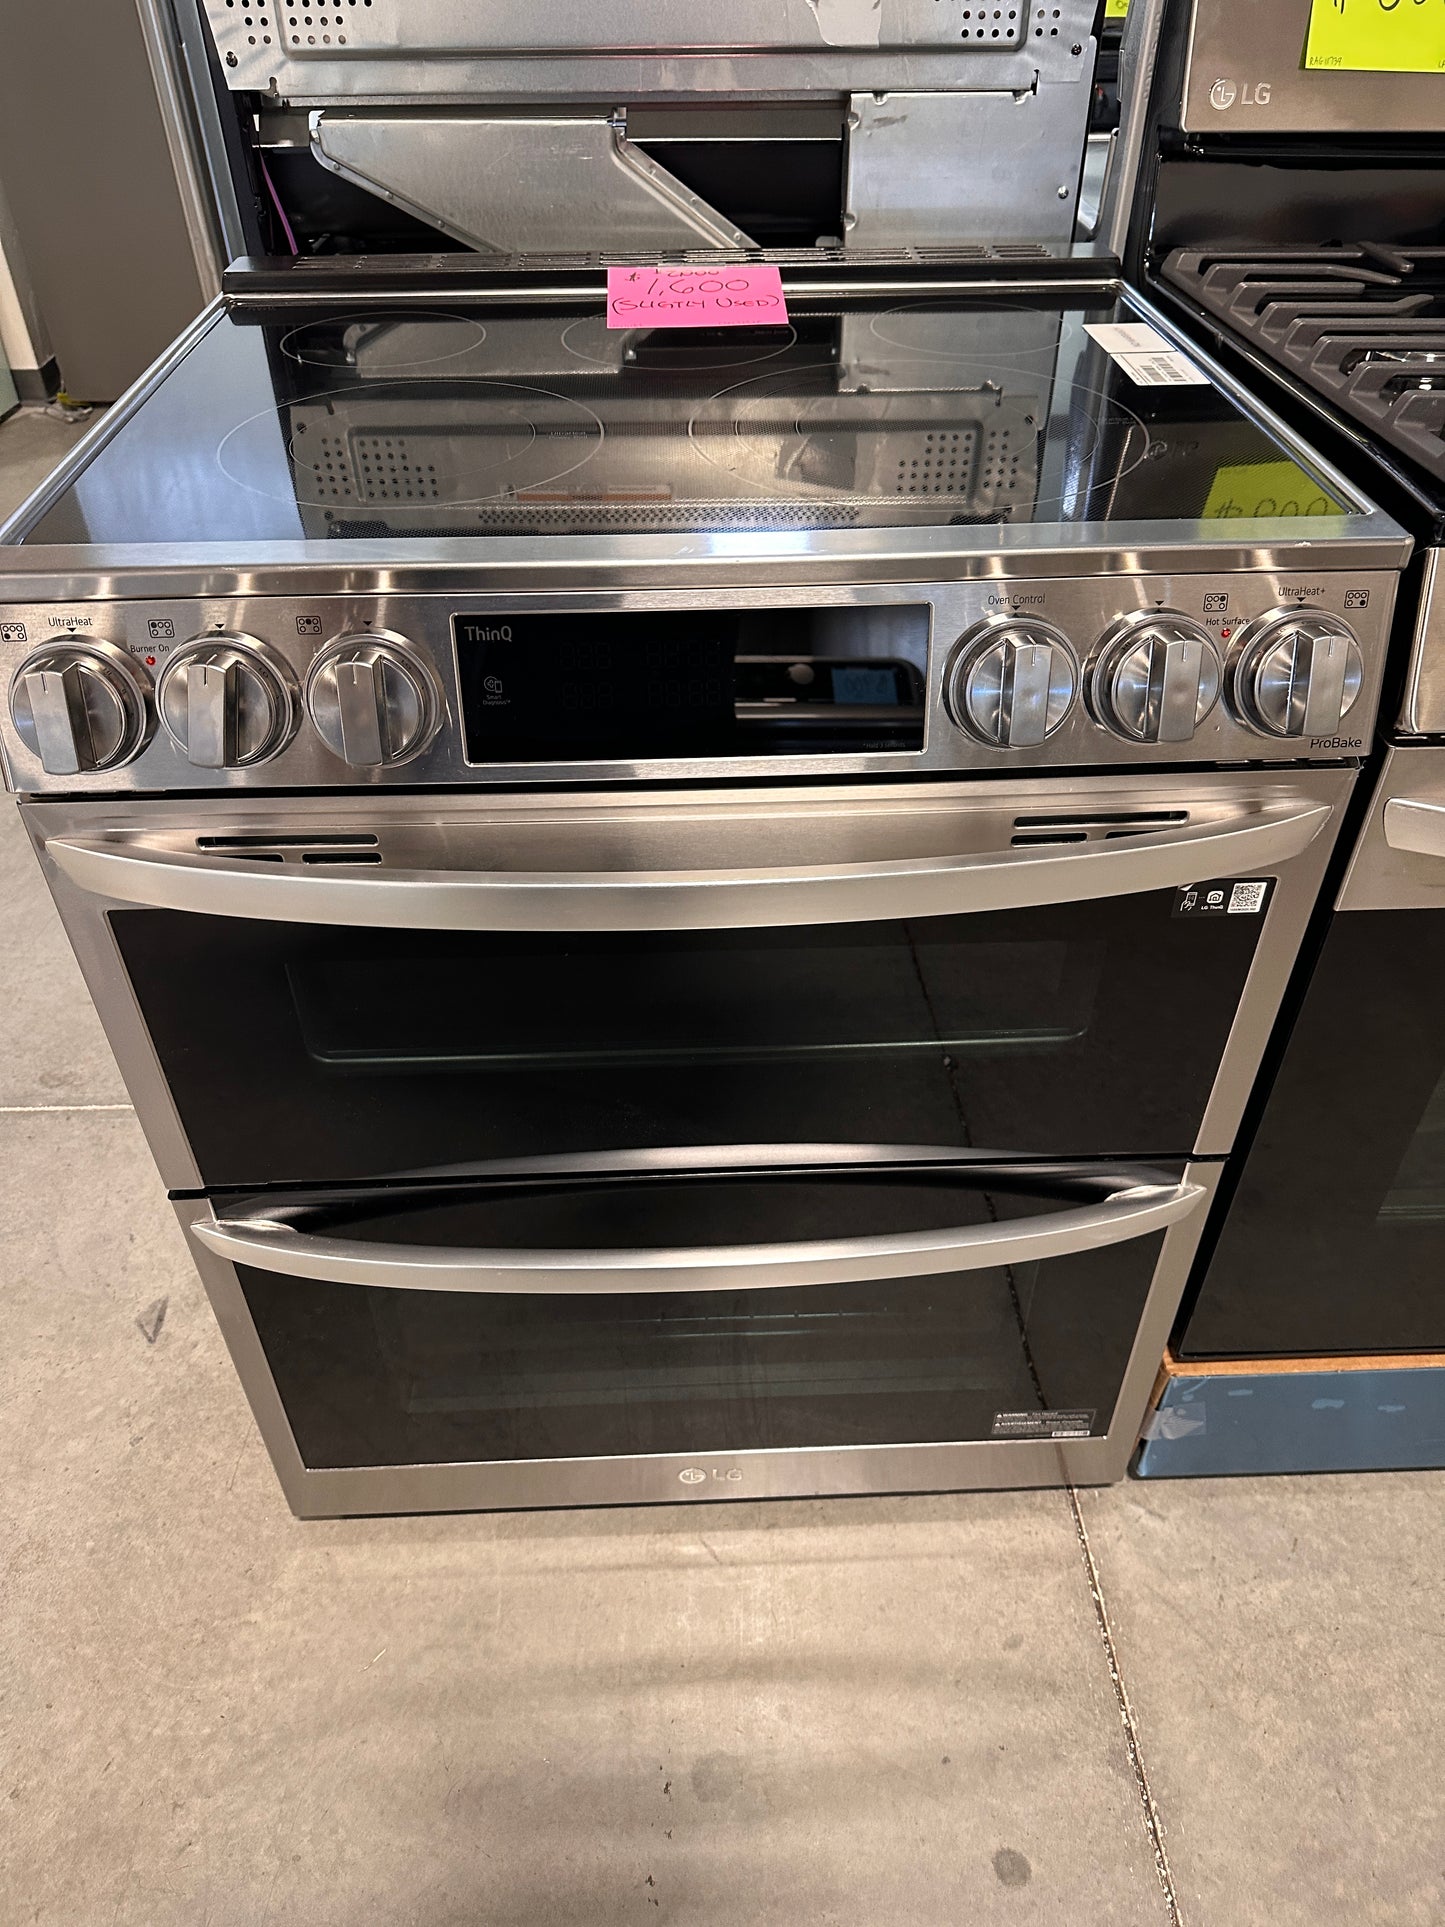 GREAT SLIGHTLY USED DOUBLE OVEN ELECTRIC RANGE - WOV11187 - LTEL7337F